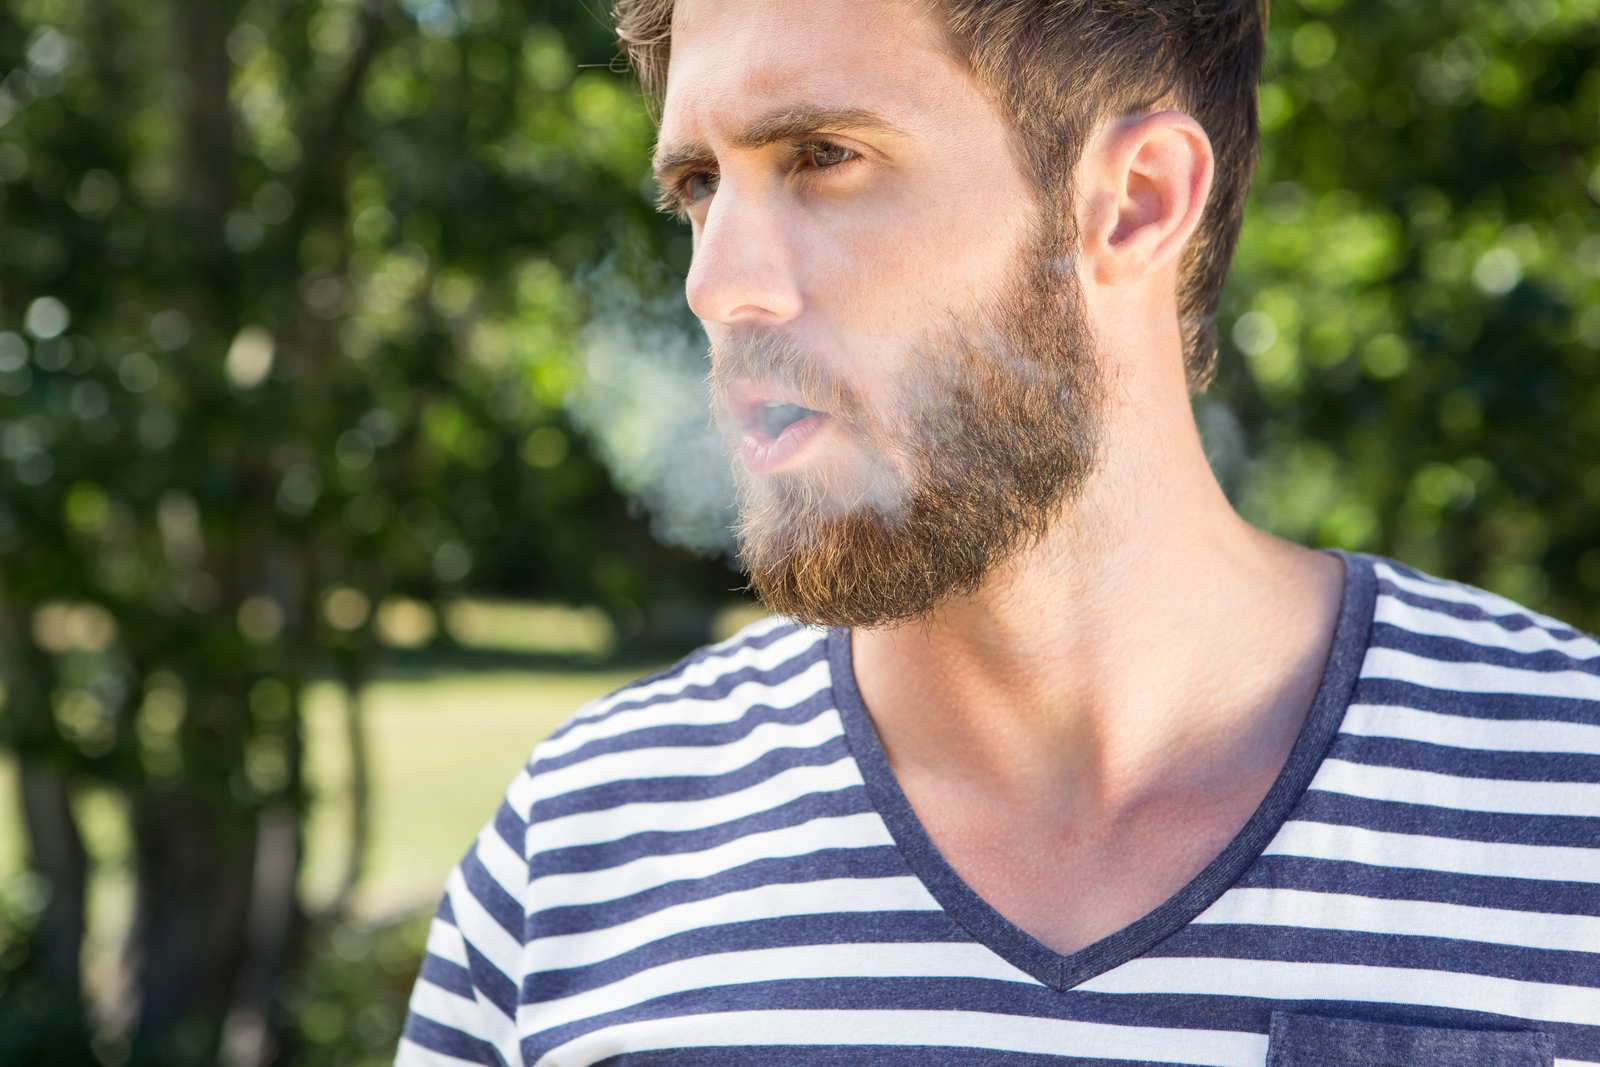 Vaping And Your Teeth: The Risks You Need To Know